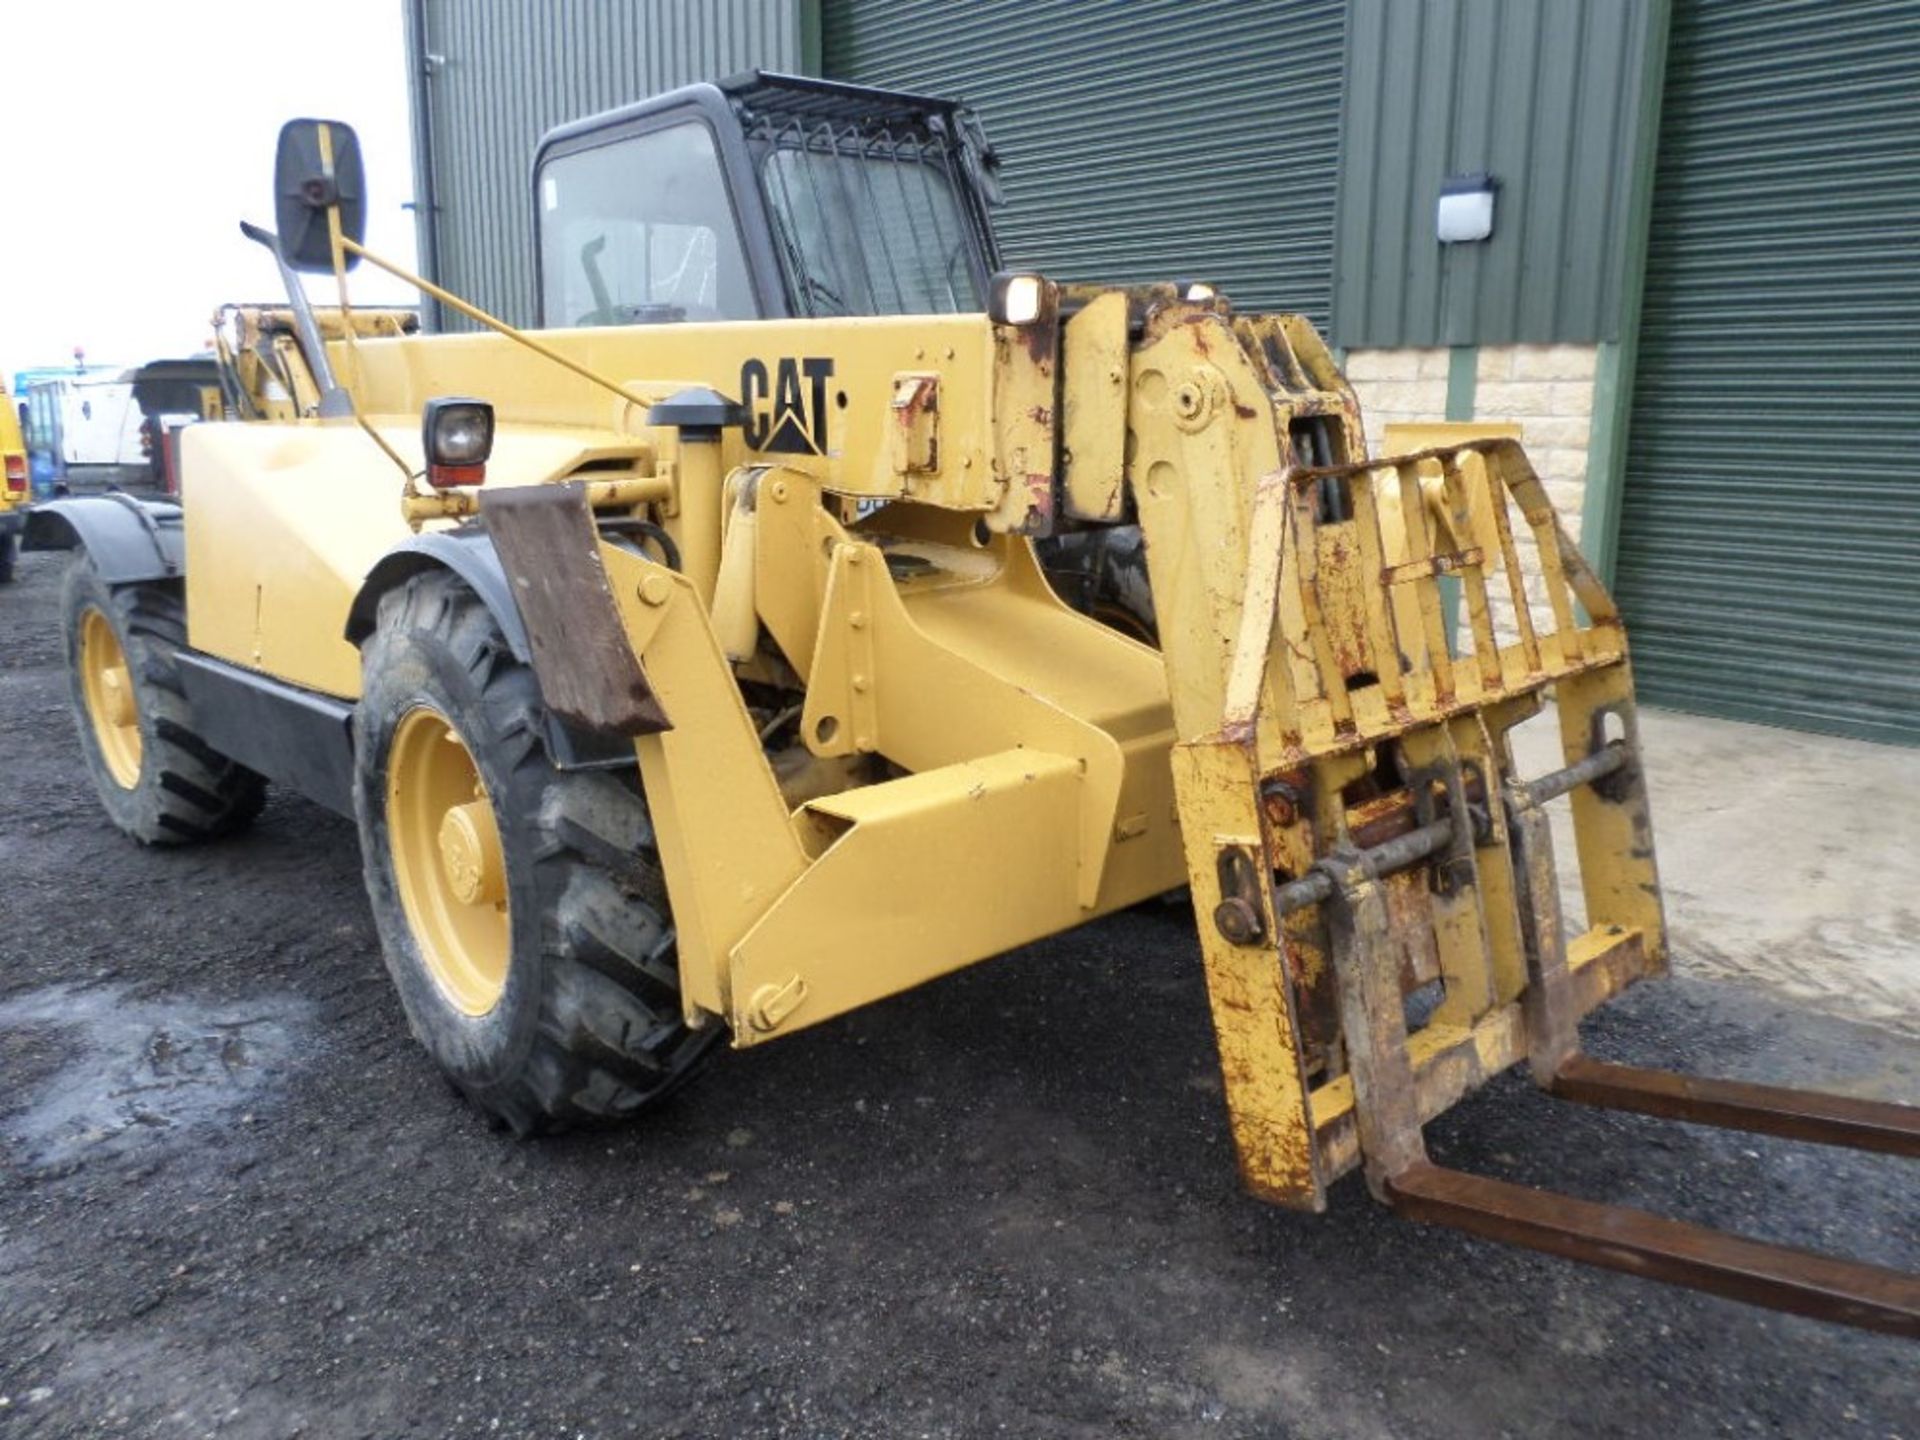 1999 CAT TH63 TELEPORTER (LOCATION SHEFFIELD) 5612 HOURS (RING FOR COLLECTION DETAILS) [+ VAT] - Image 3 of 13